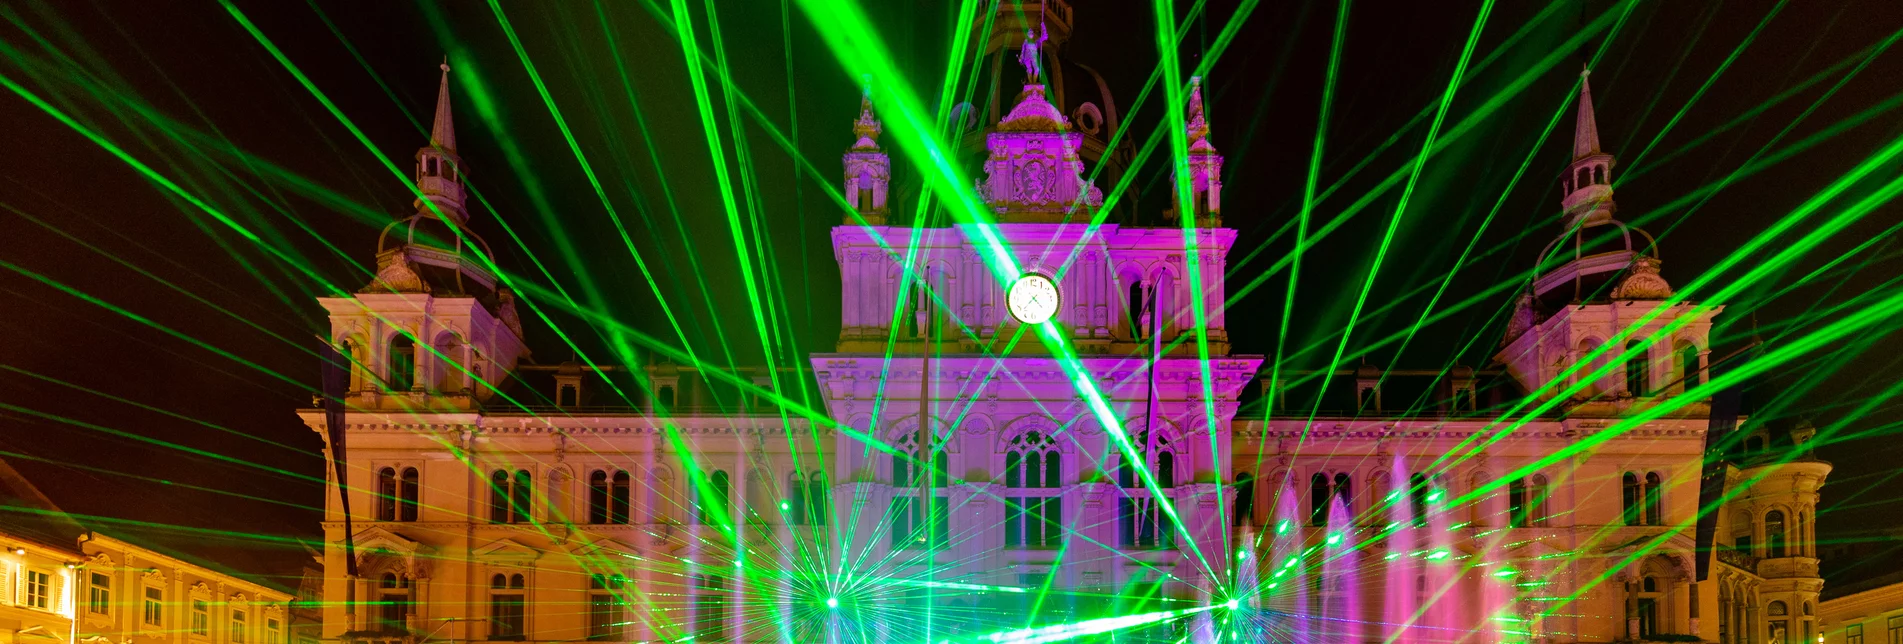 New Year's Eve spectacle on Graz main square | © Graz Tourismus | Harry Schiffer